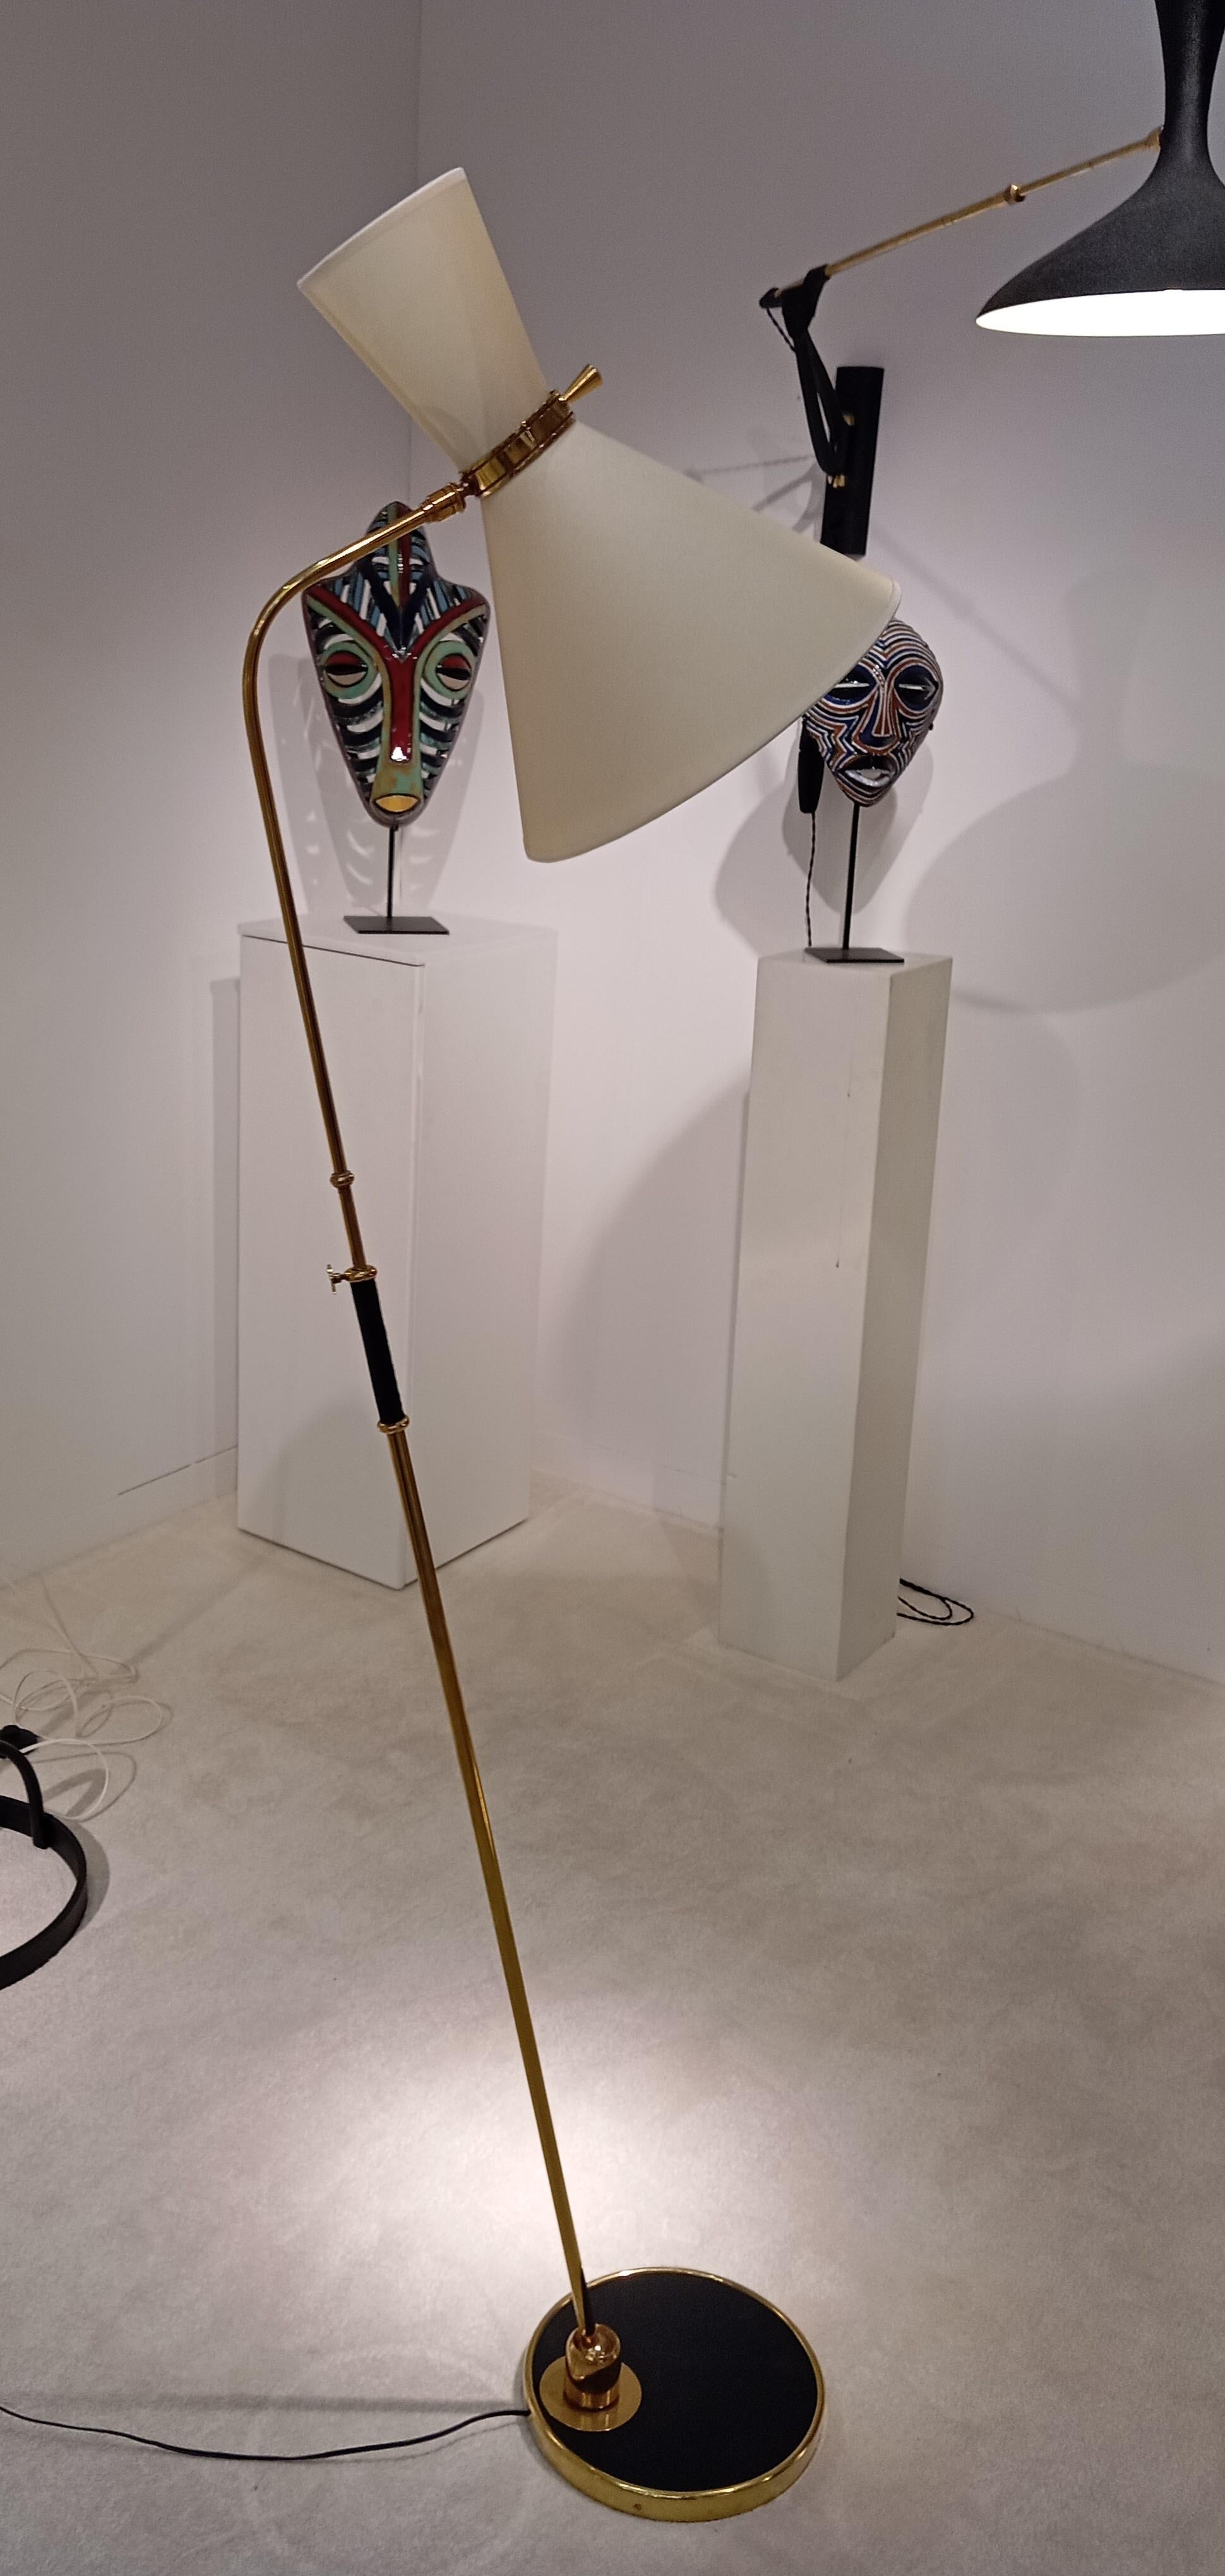  floor lamps,
composed of a circular base in cast iron sheathed in black leather, and set with a brass ring.
Brass arm with adjustable height, and orientable by a brass ball joint on the base of the foot.
Lighting by 2 conical shades, installed on a